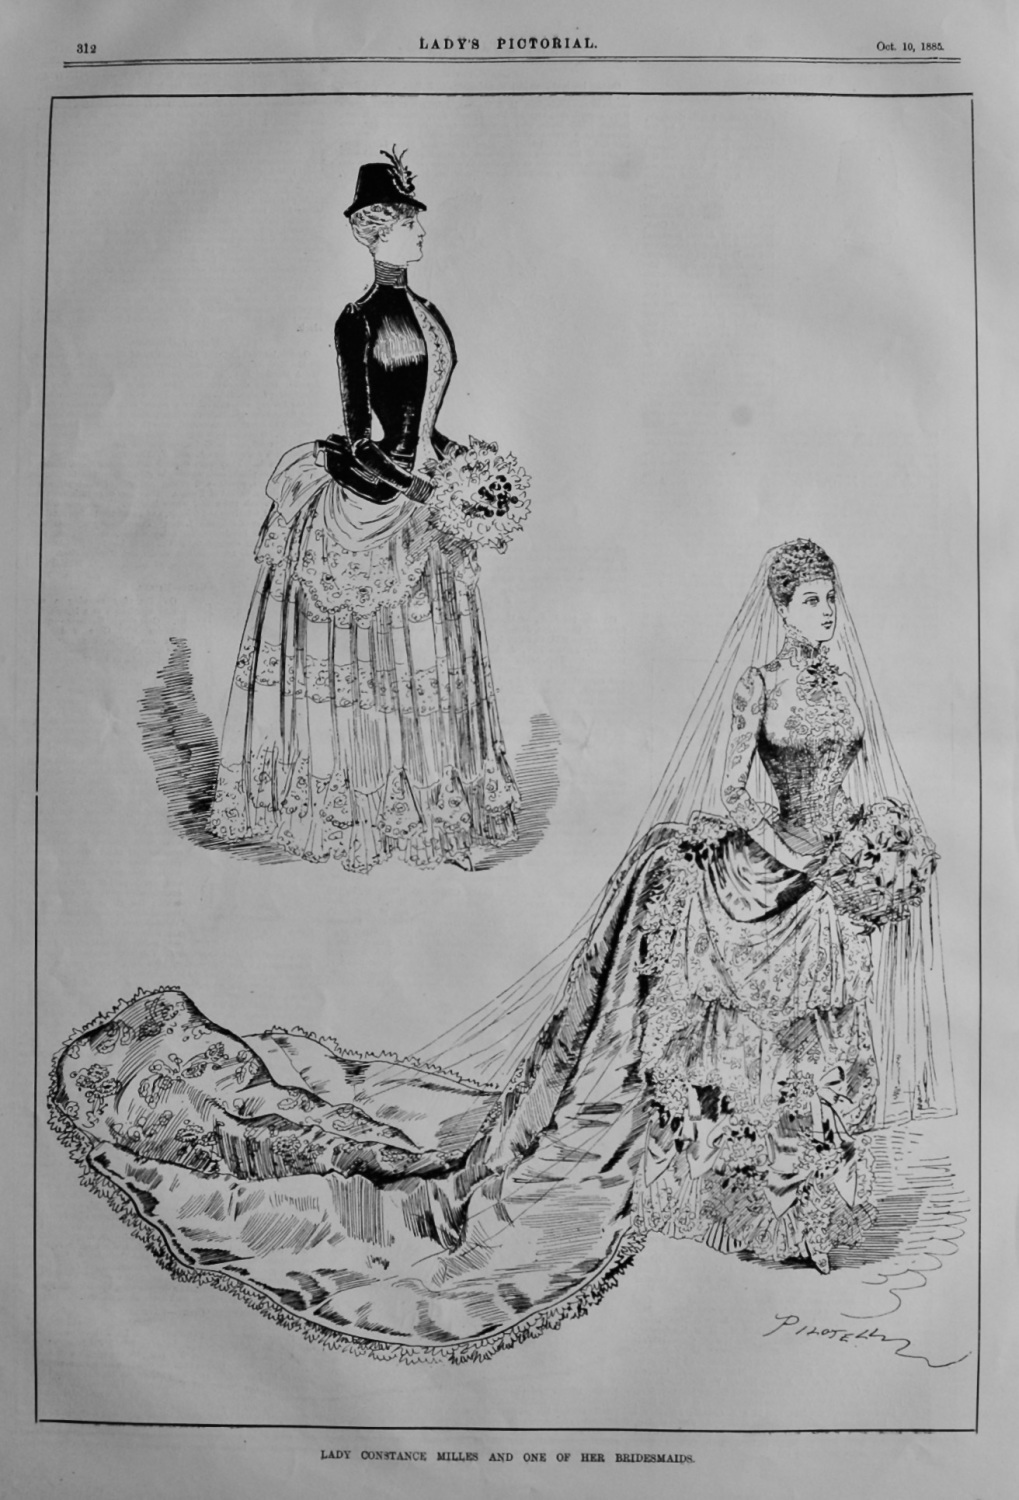 Lady Constance Miles and one of her Bridesmaids.  1885.